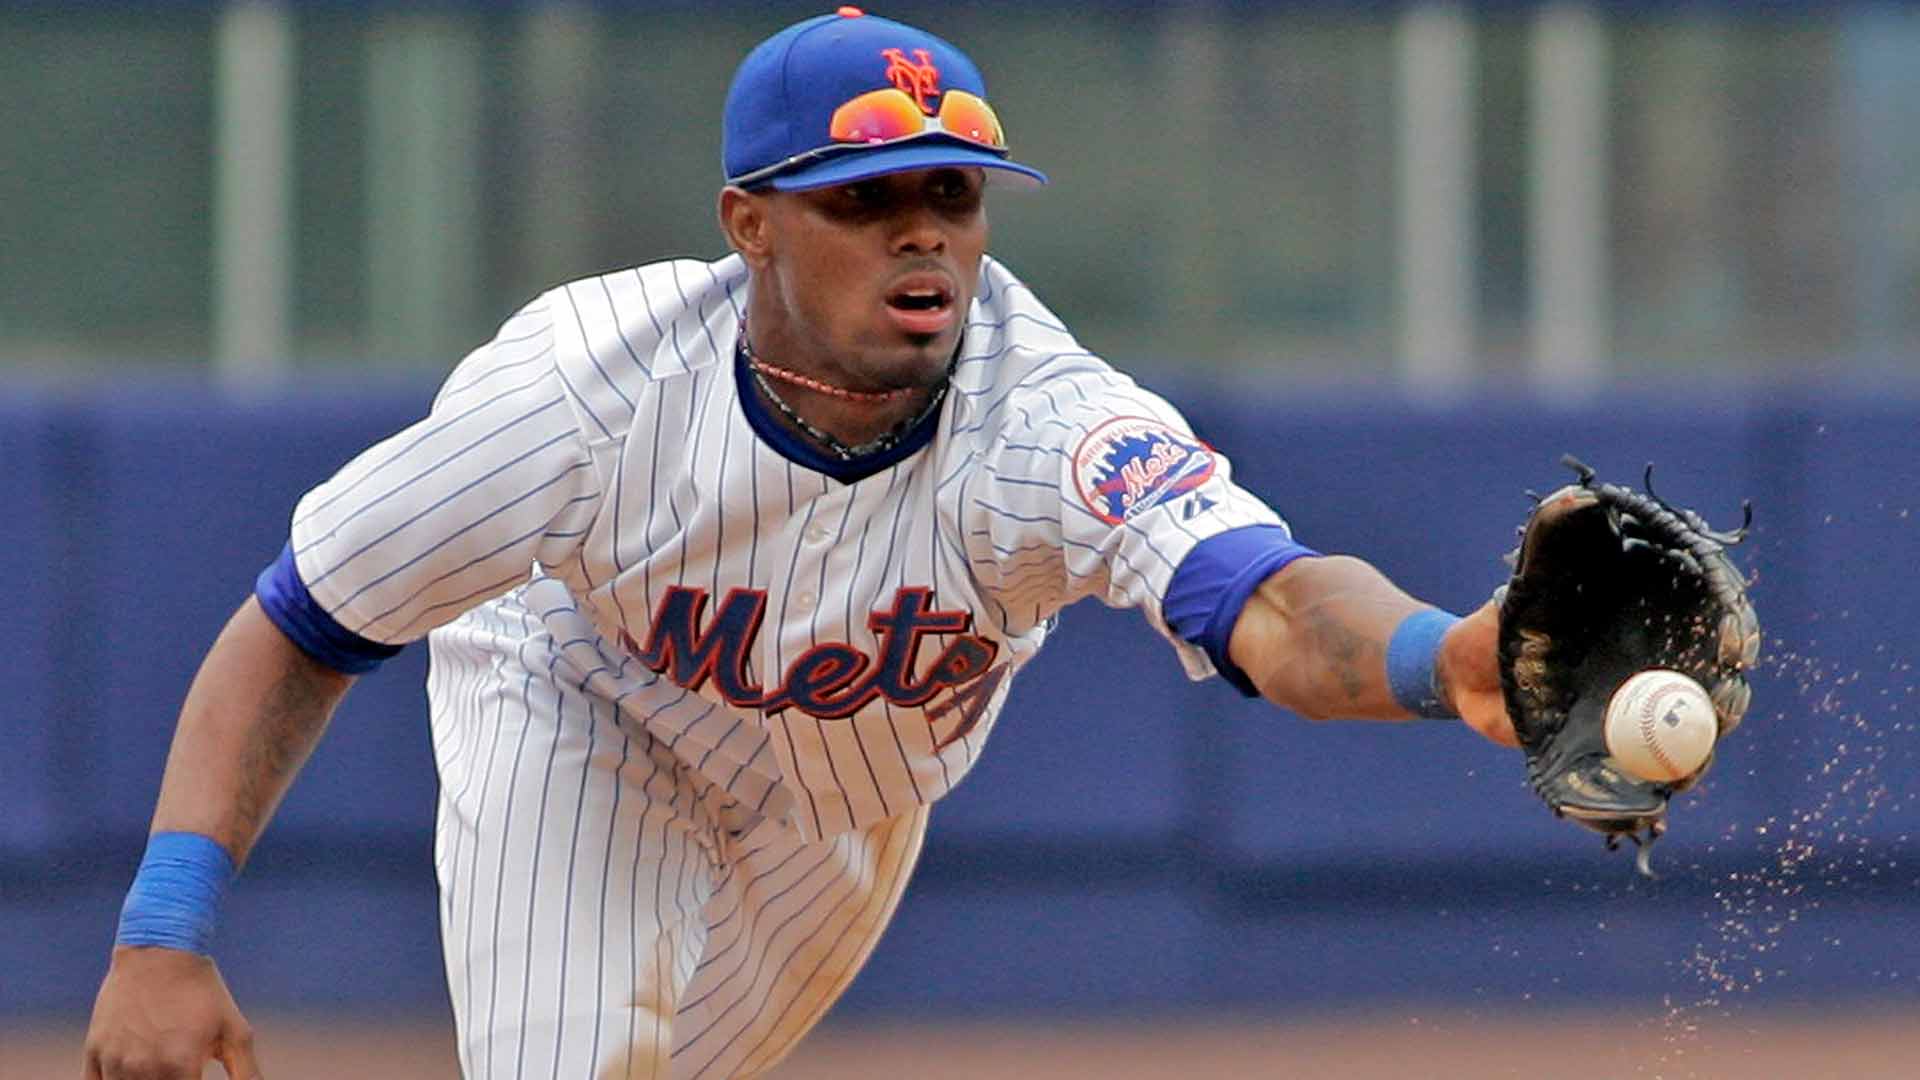 New York Mets player Jose Reyes announces retirement after 16 years in Major League Baseball New York